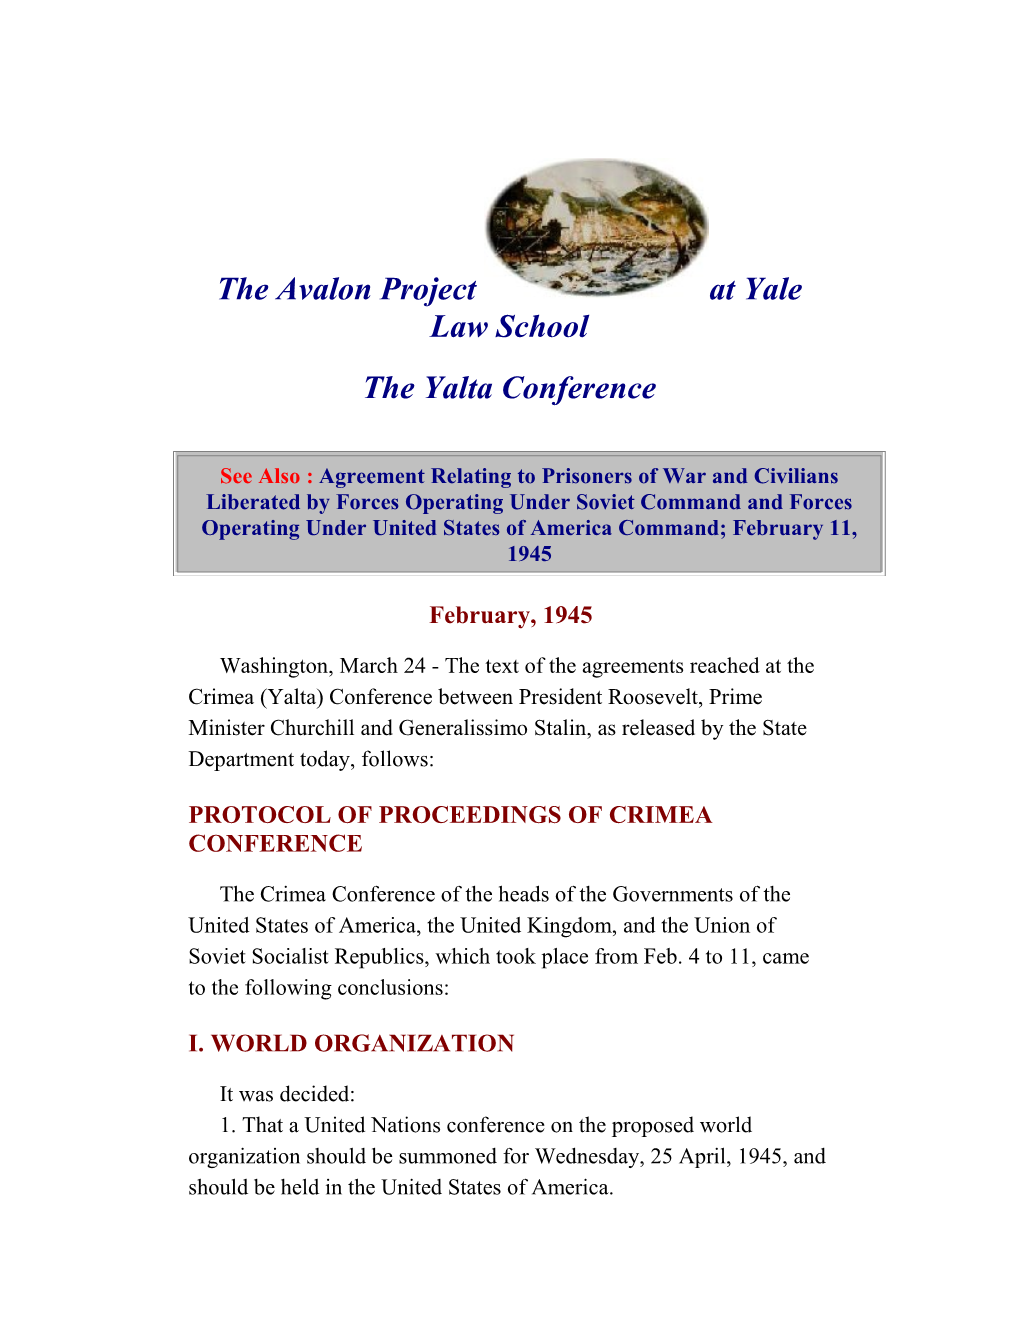 The Avalon Project at Yale Law School